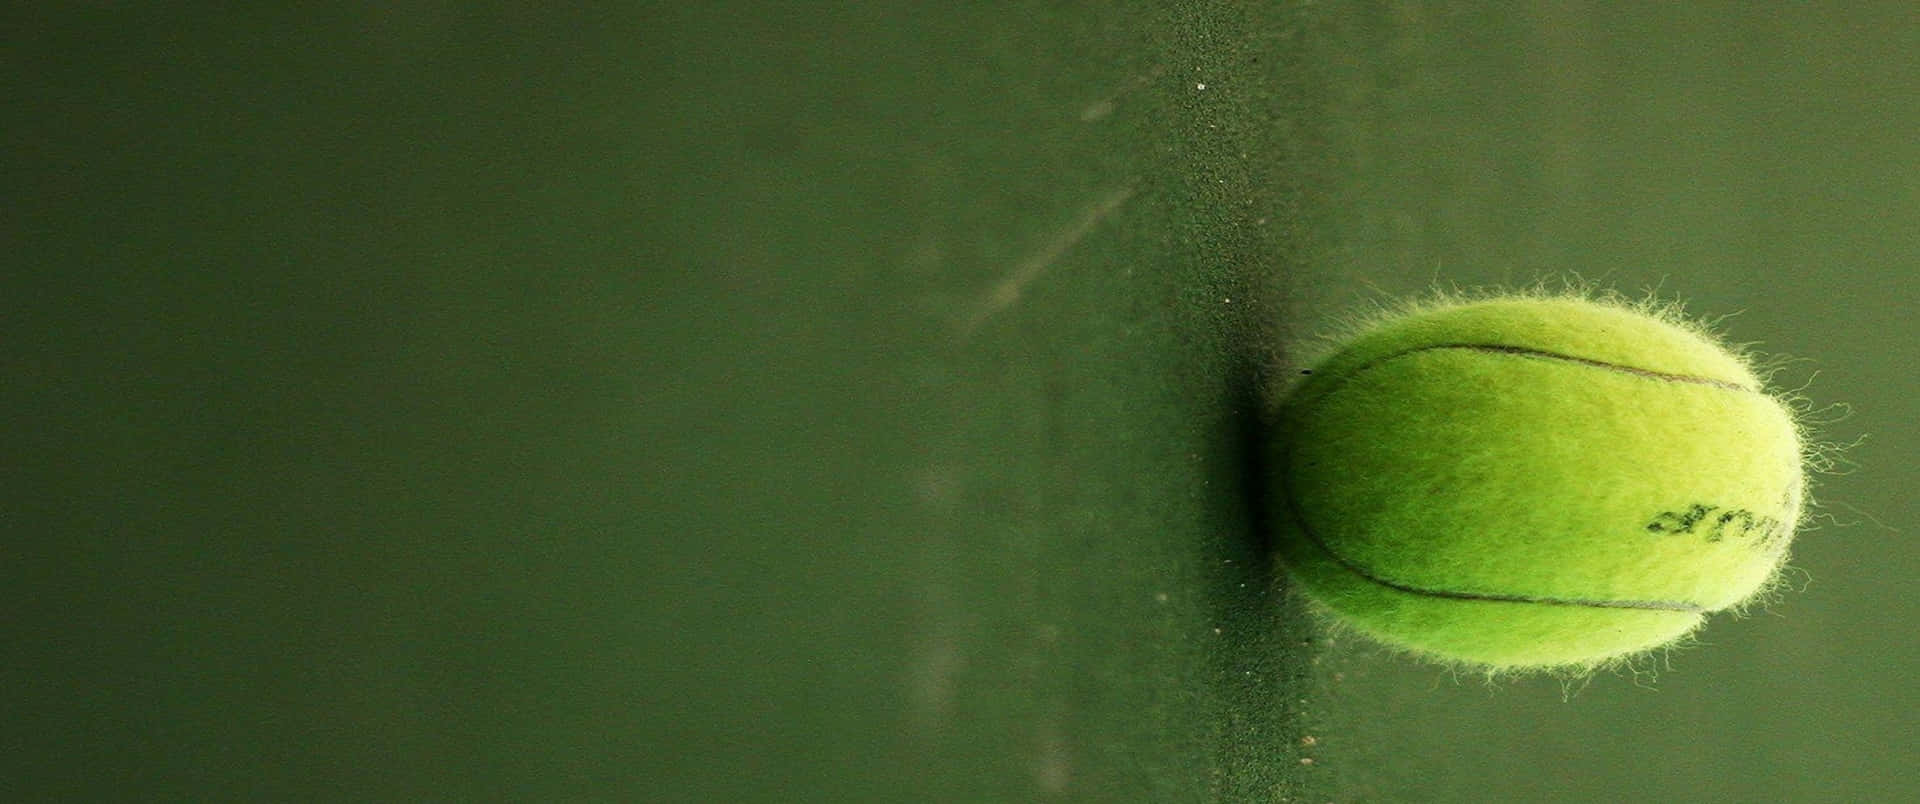 A Tennis Ball Is On A Wall